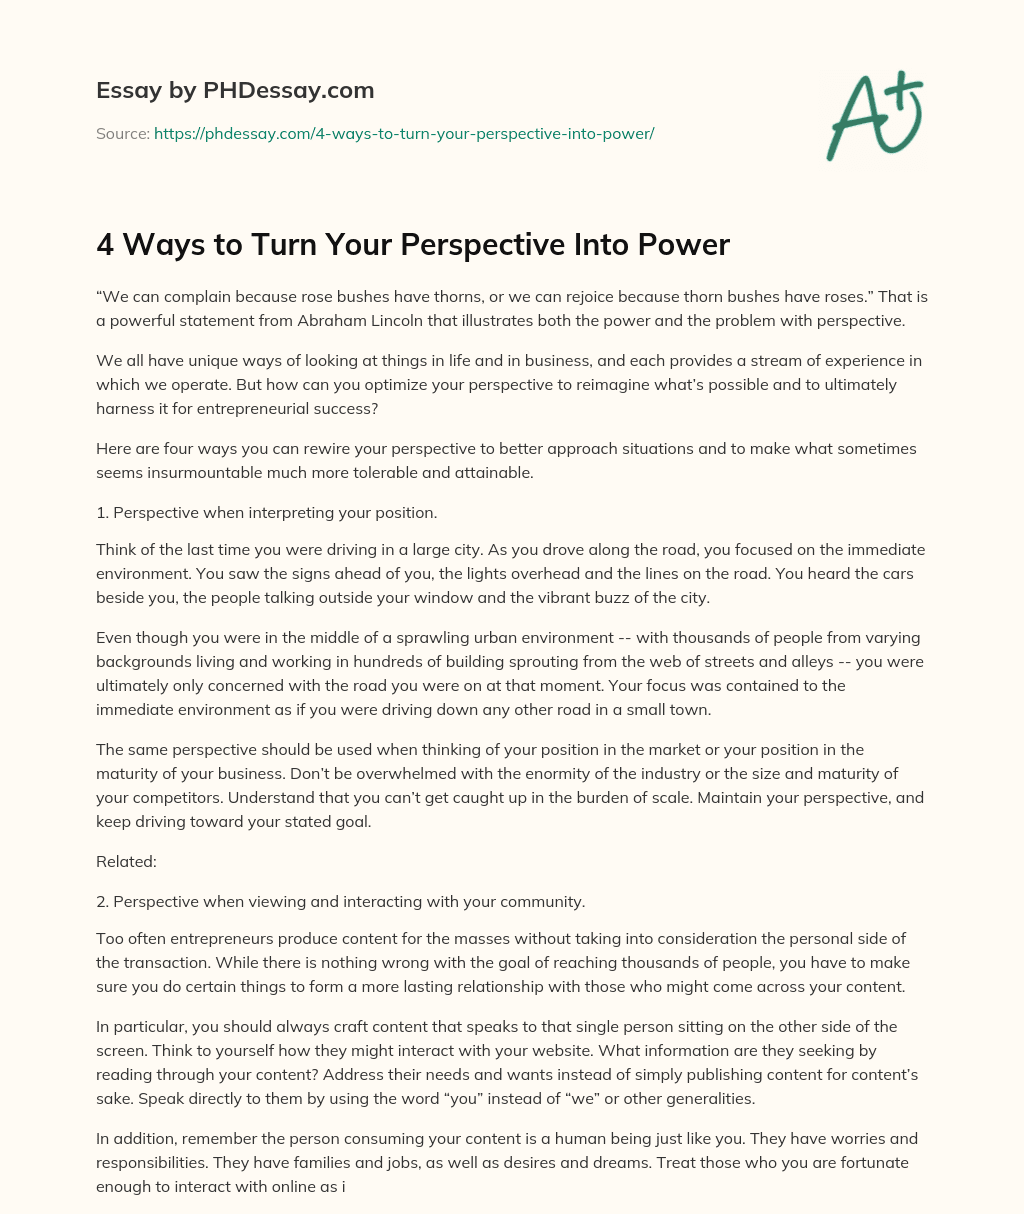 4 Ways to Turn Your Perspective Into Power essay